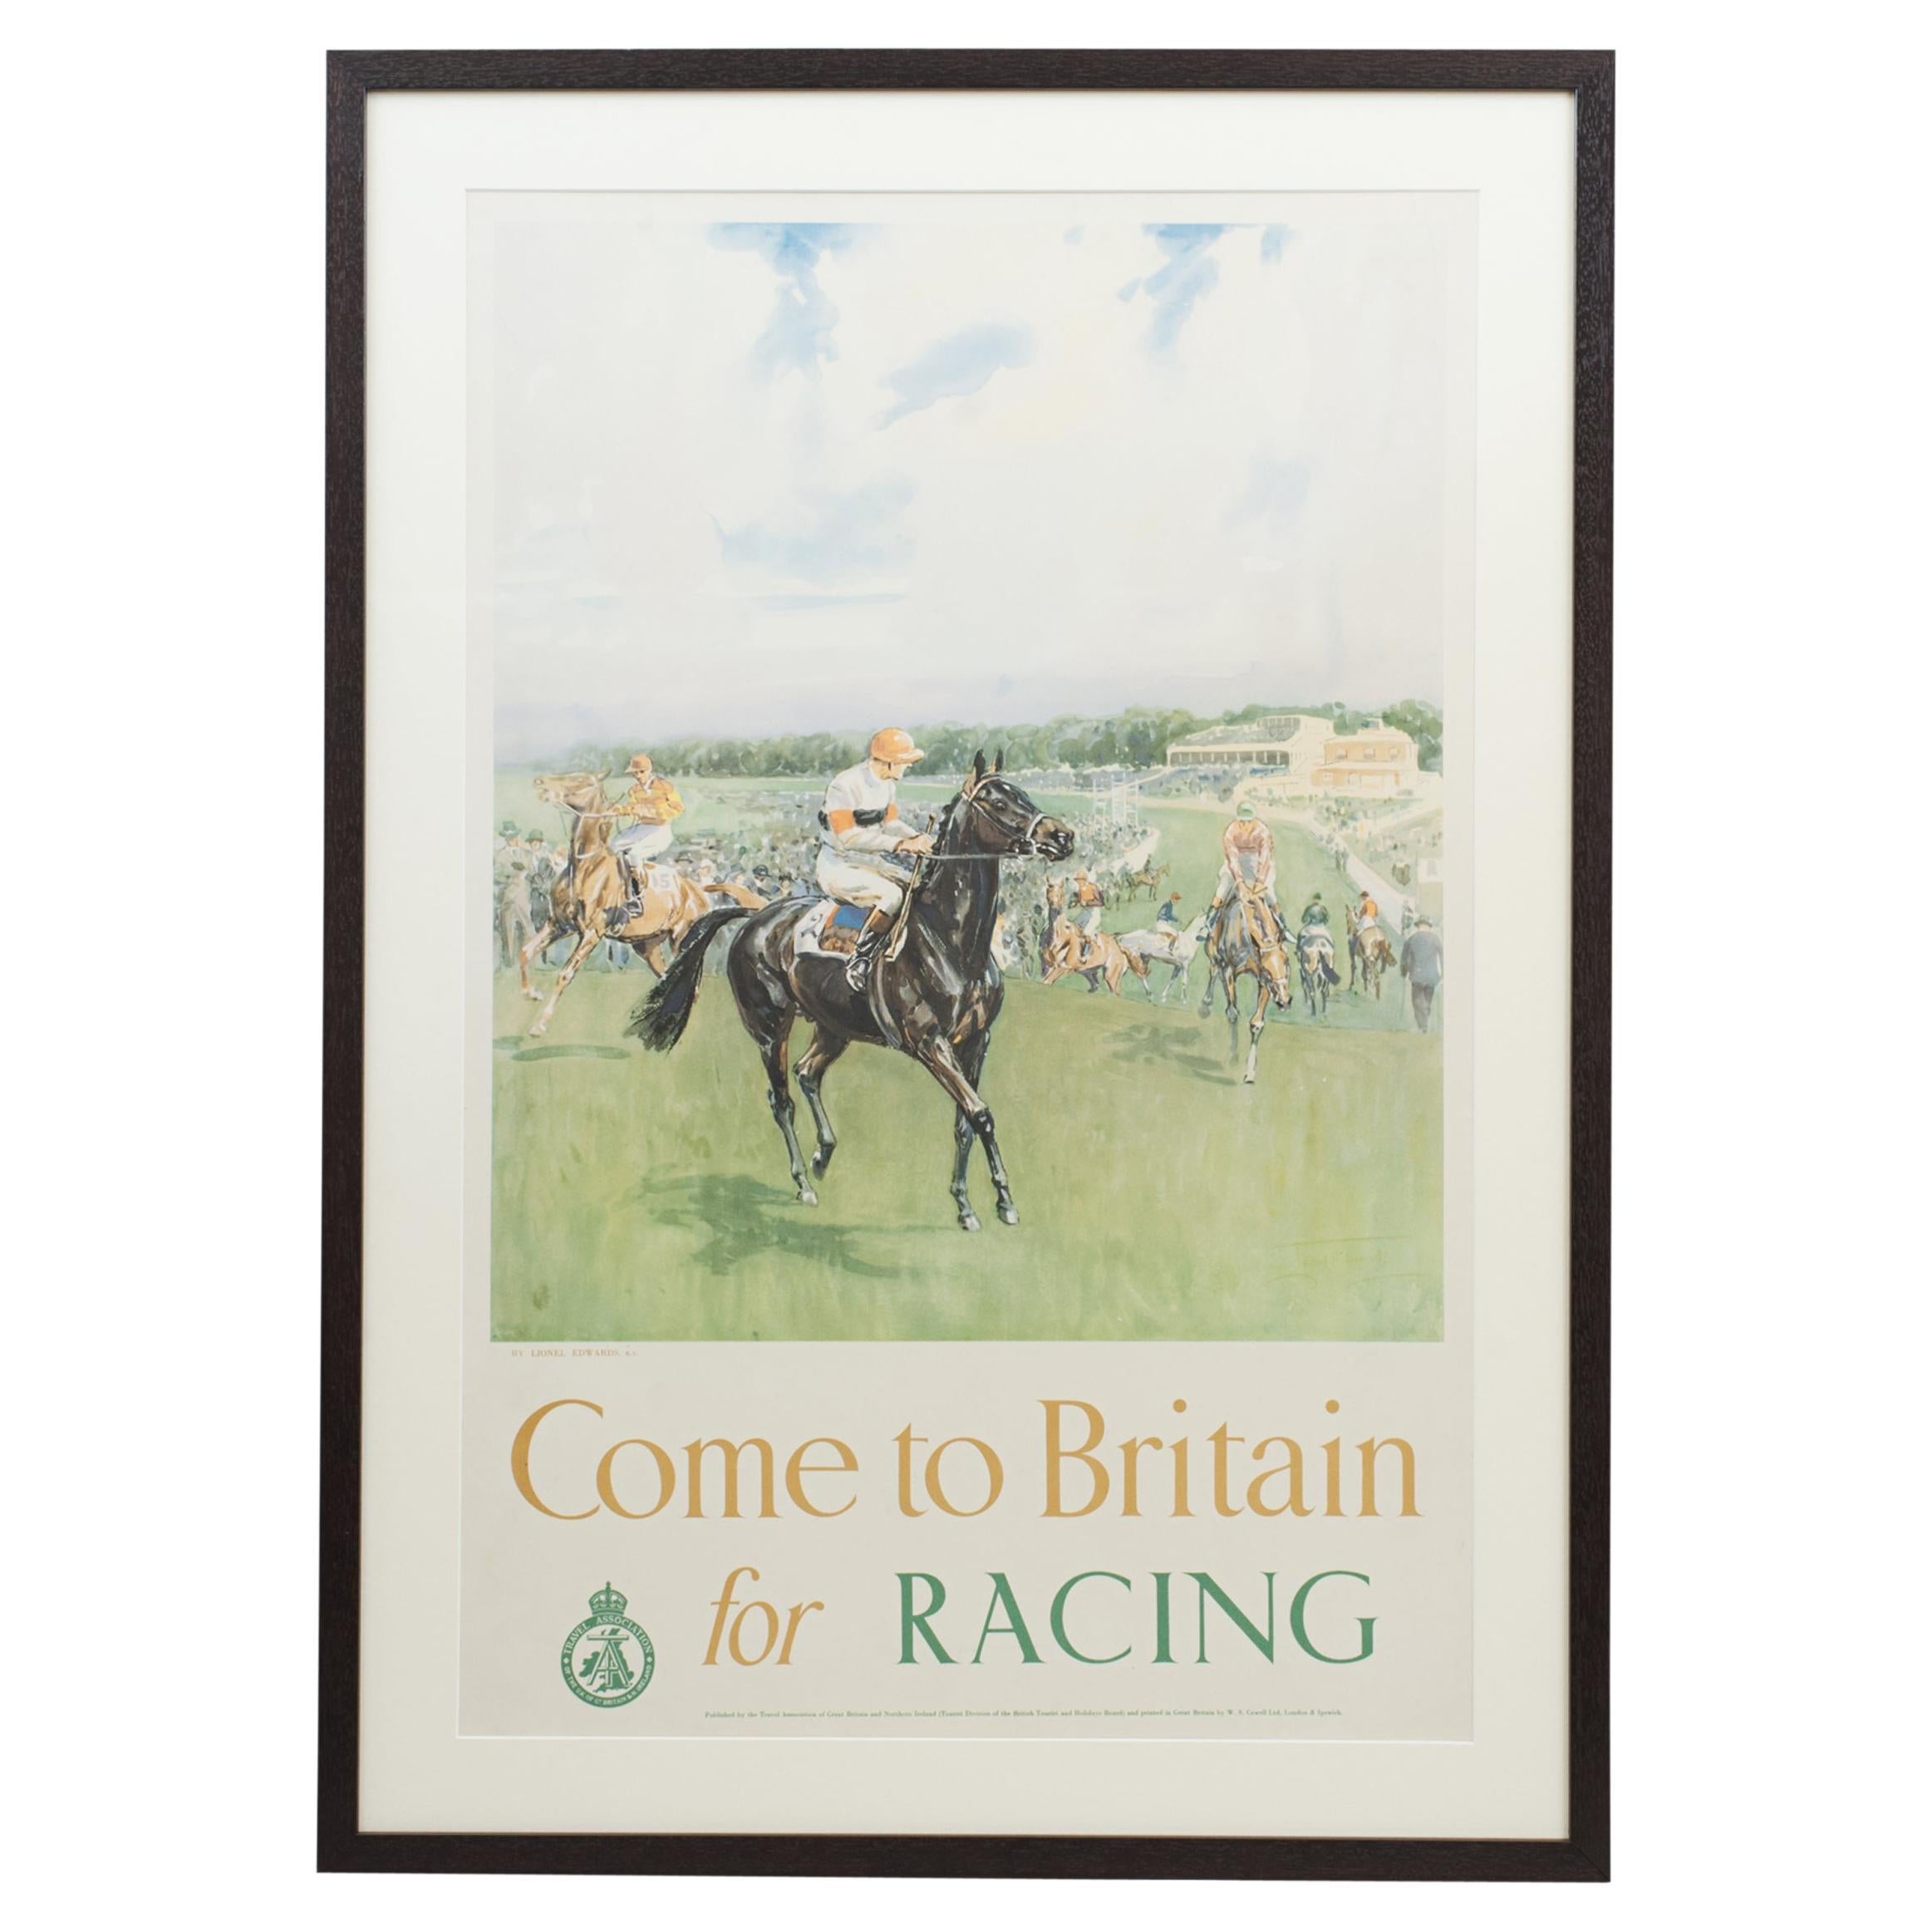 Travel Poster by Lionel Edwards, Come to Britain for Racing Poster For Sale